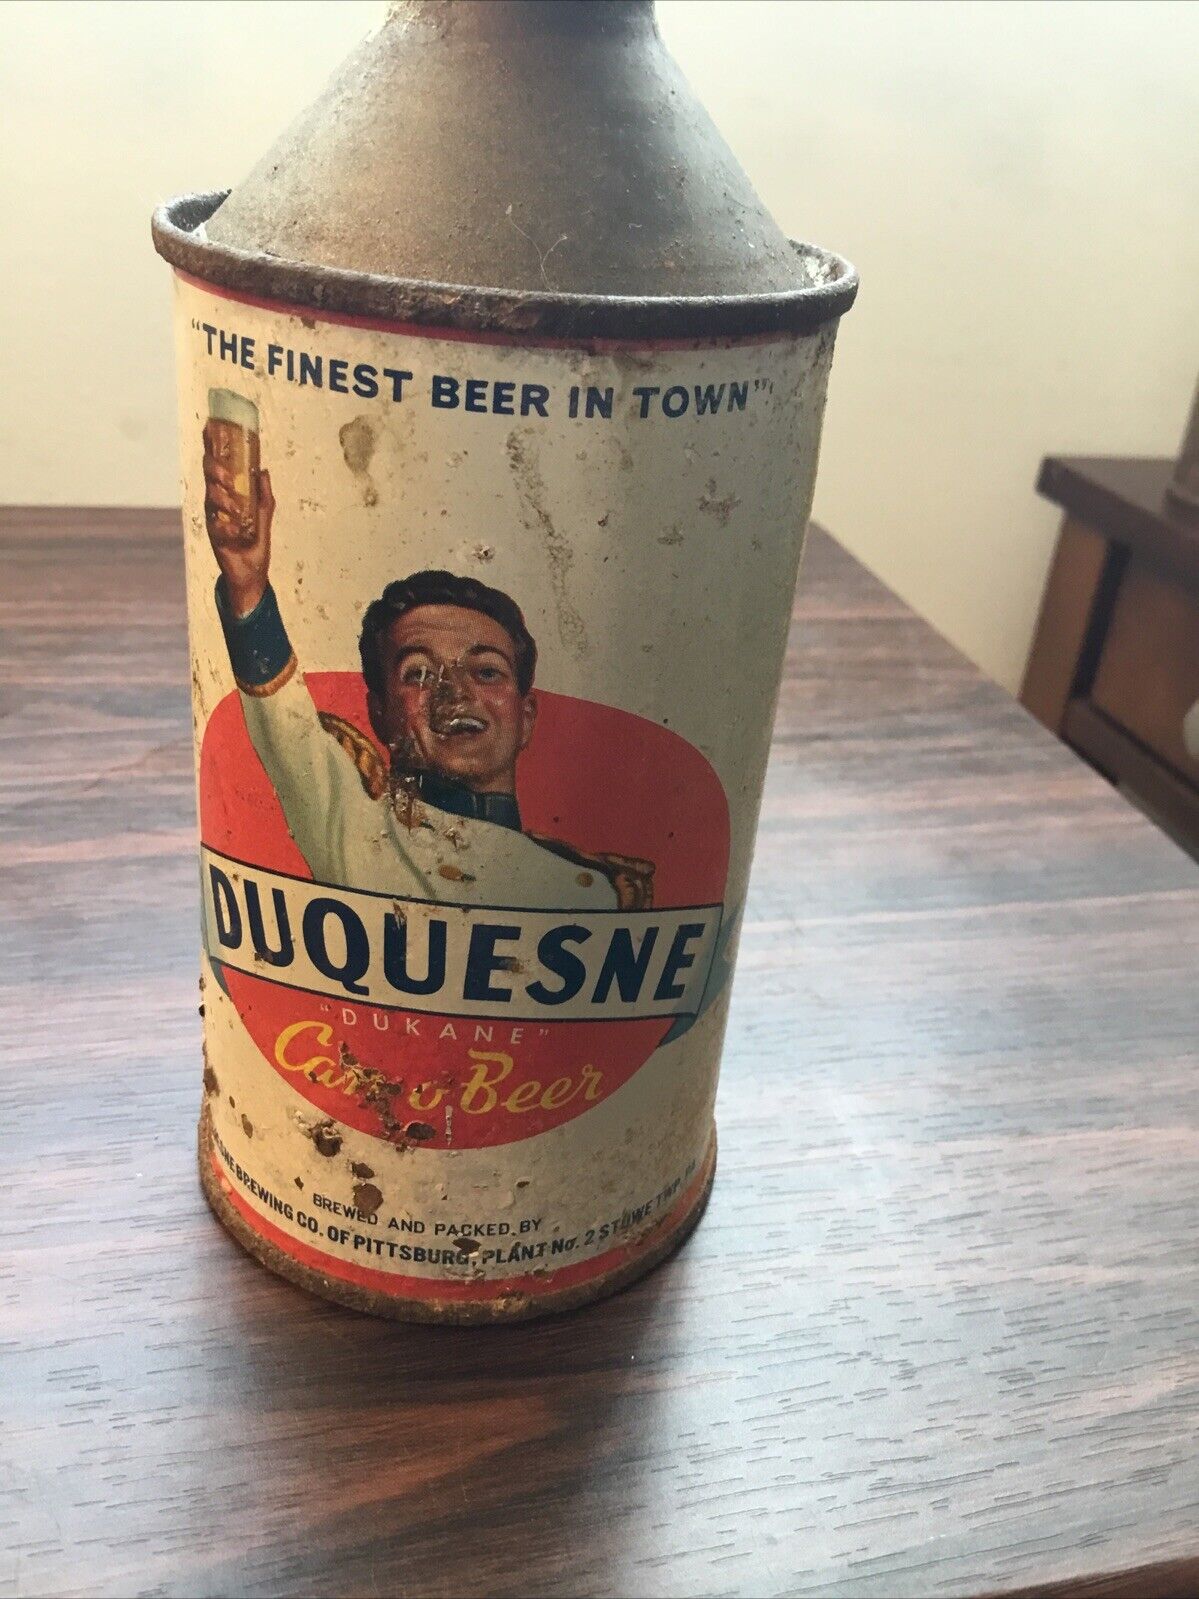 DUQUESNE CONE TOP (1940s-50s) DUQUESNE BREWING COMPANY, PITTSBURGH